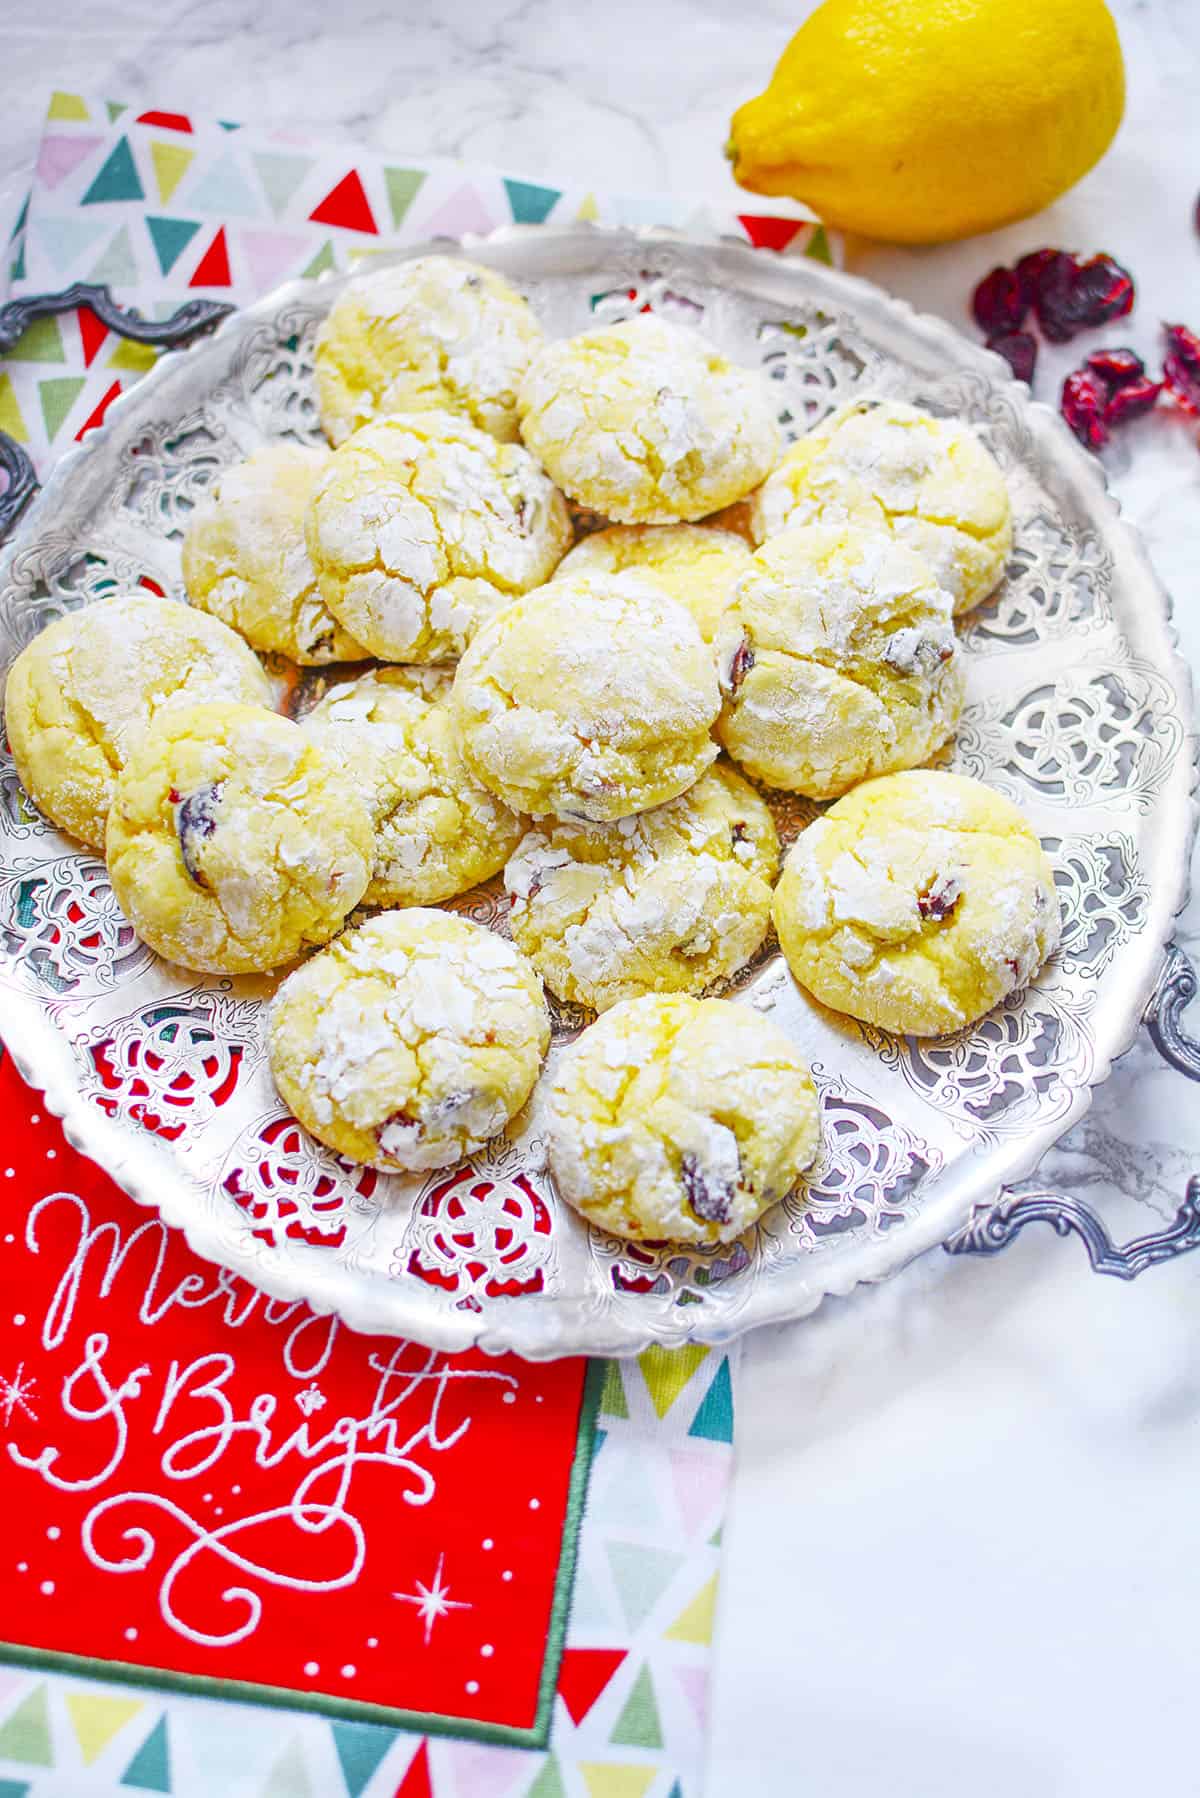 Festive cookies on a serving plate with a Christmas napkin underneath.